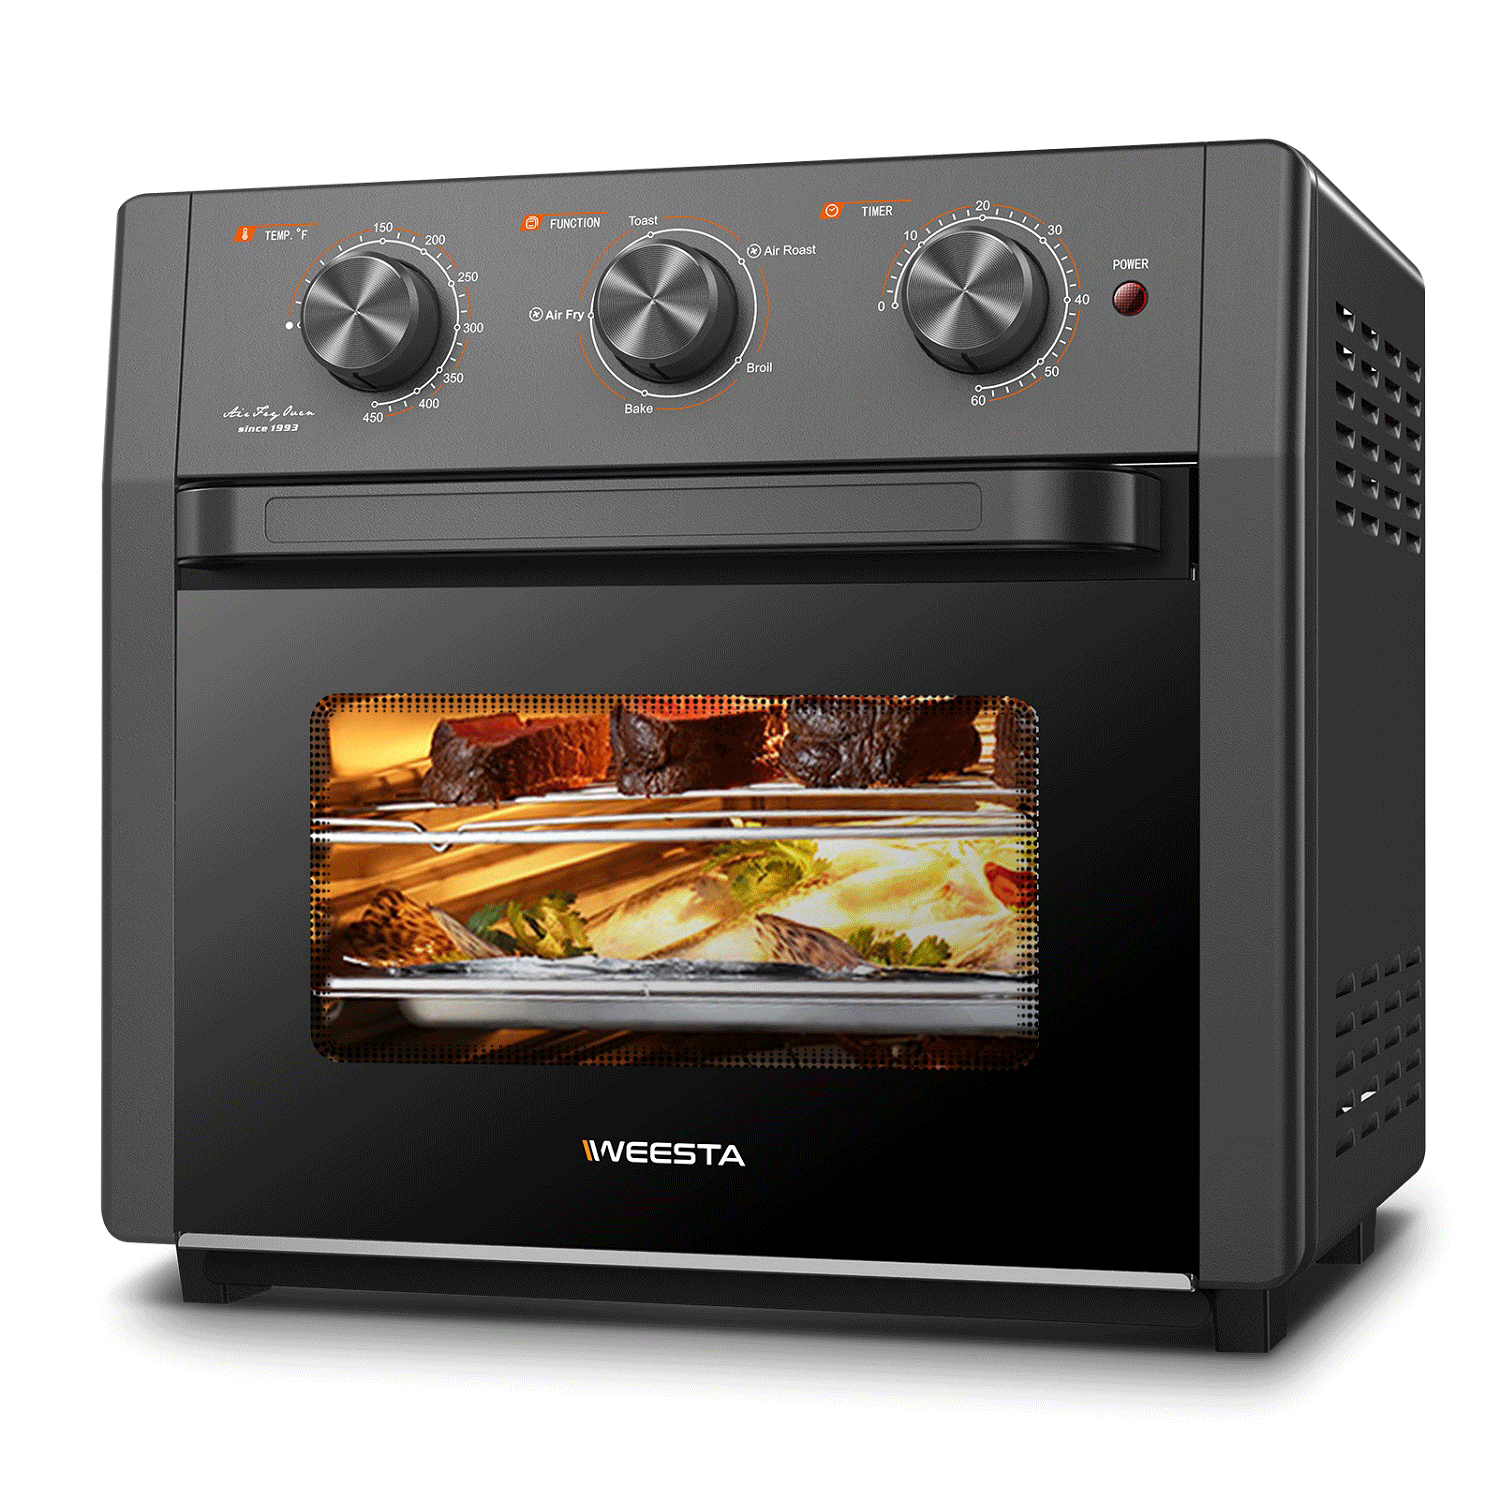 JOYAMI Air Fry Countertop Oven, 18QT Convection Oven and Indoor Grill Combo  with See-Through Window for Air Fry, Bake, Dehydrate, Toast, 6 Nonstick